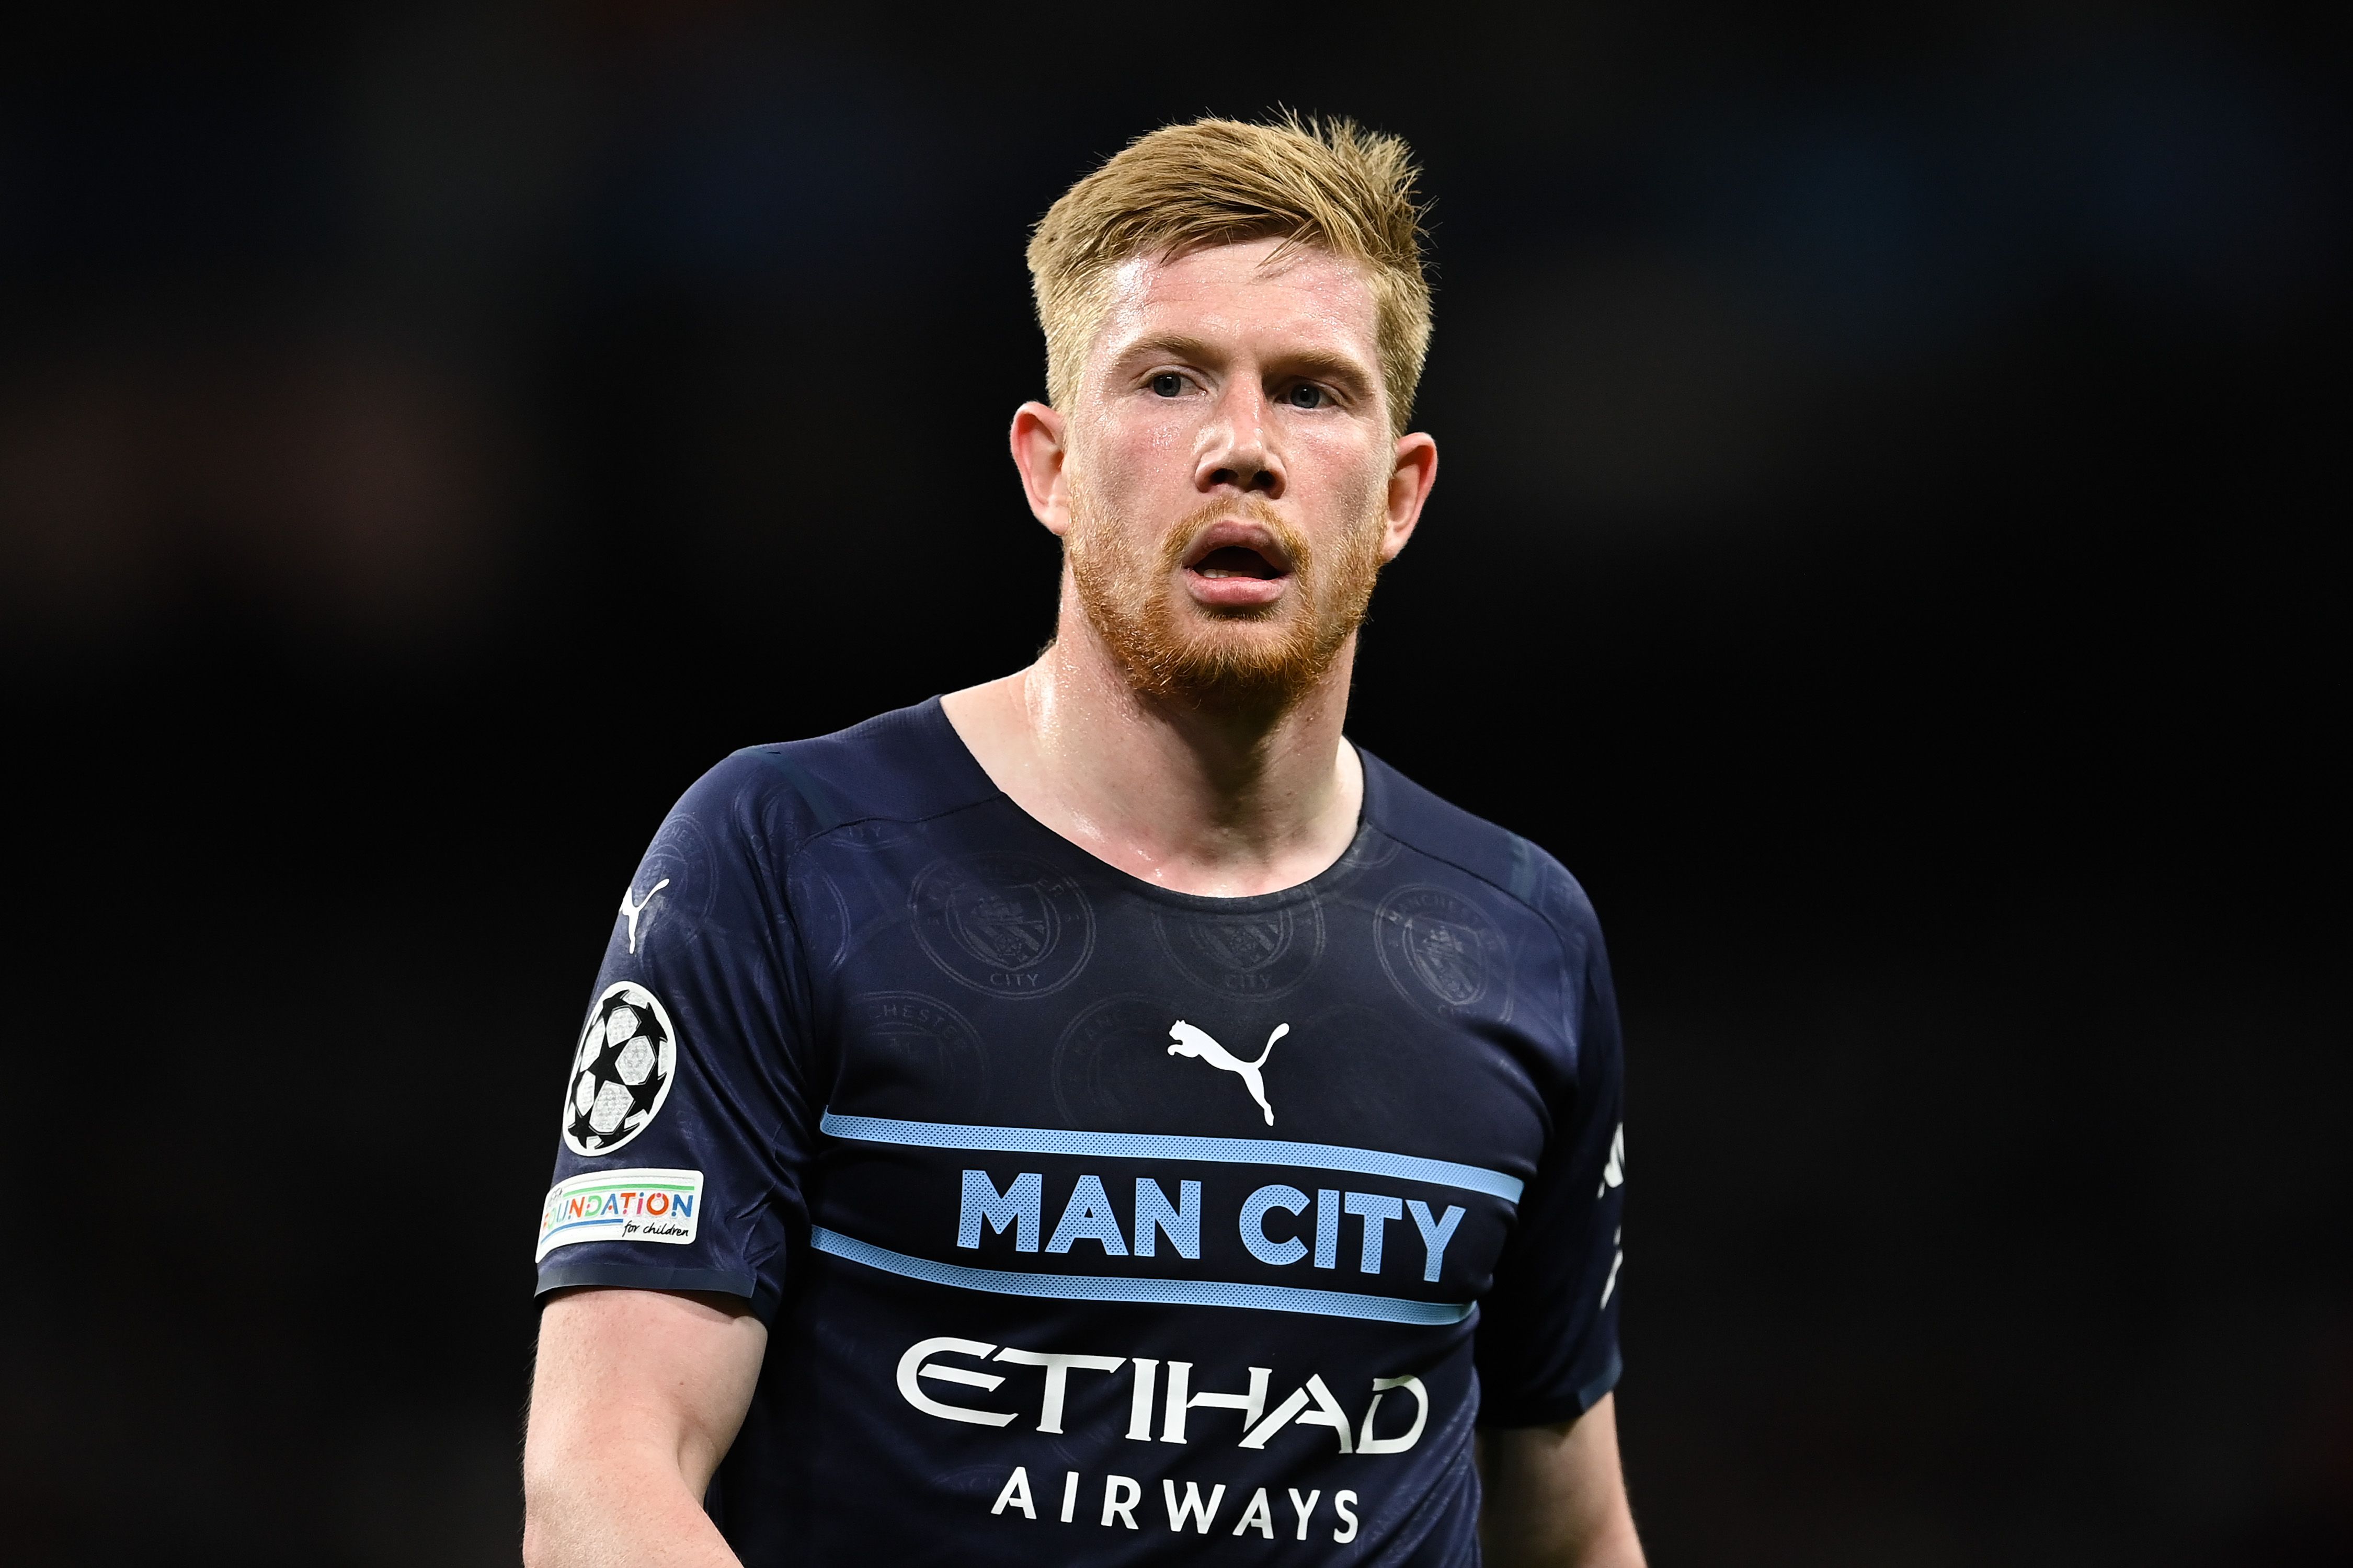 De Bruyne was incredible for Man City